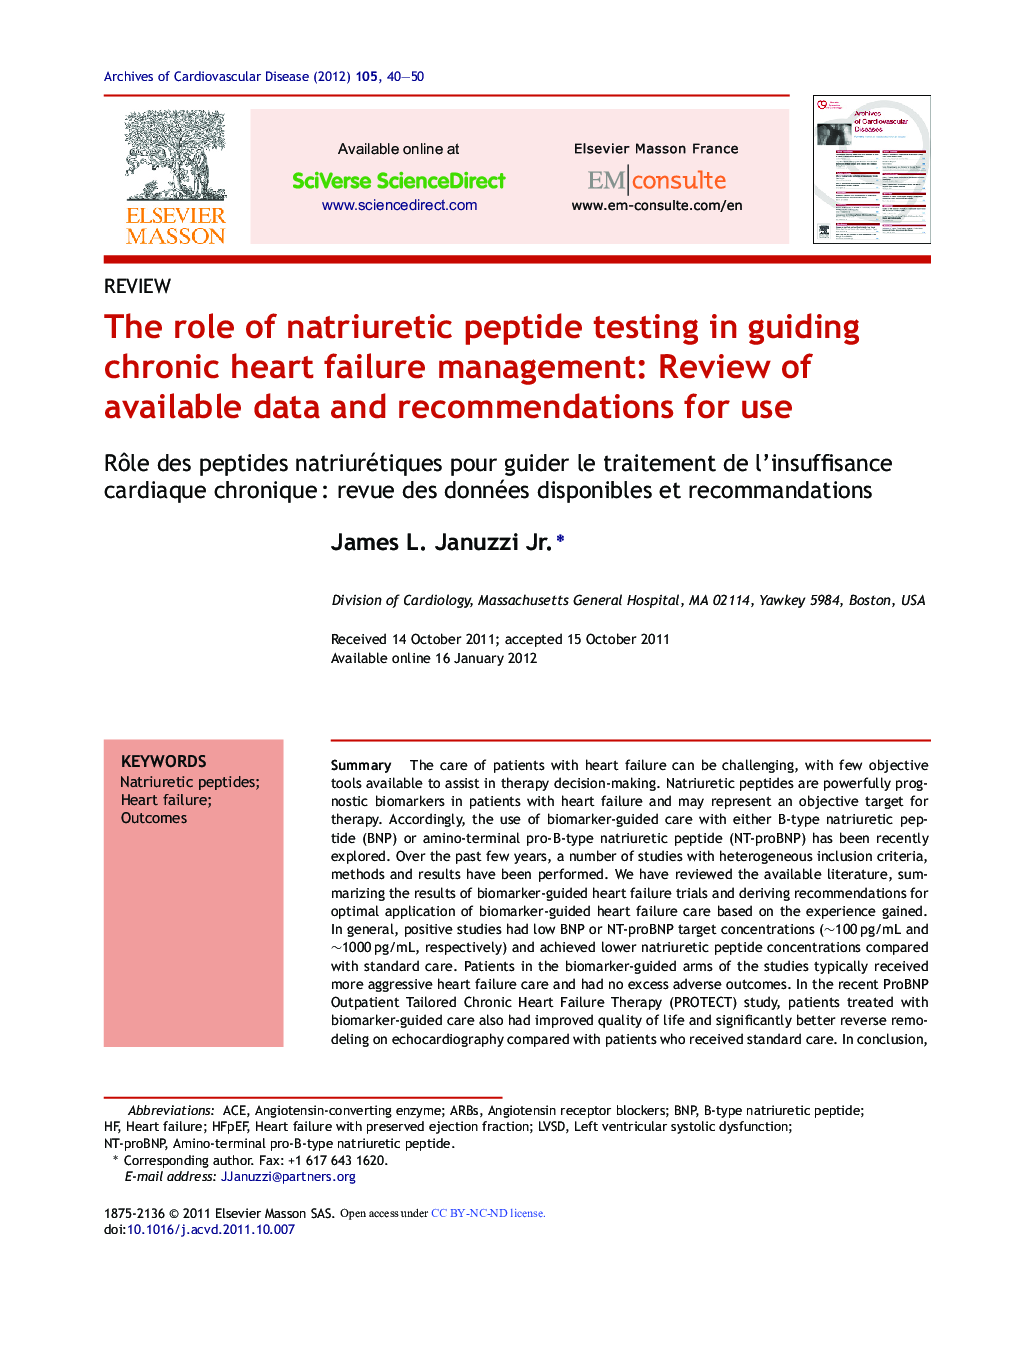 The role of natriuretic peptide testing in guiding chronic heart failure management: Review of available data and recommendations for use